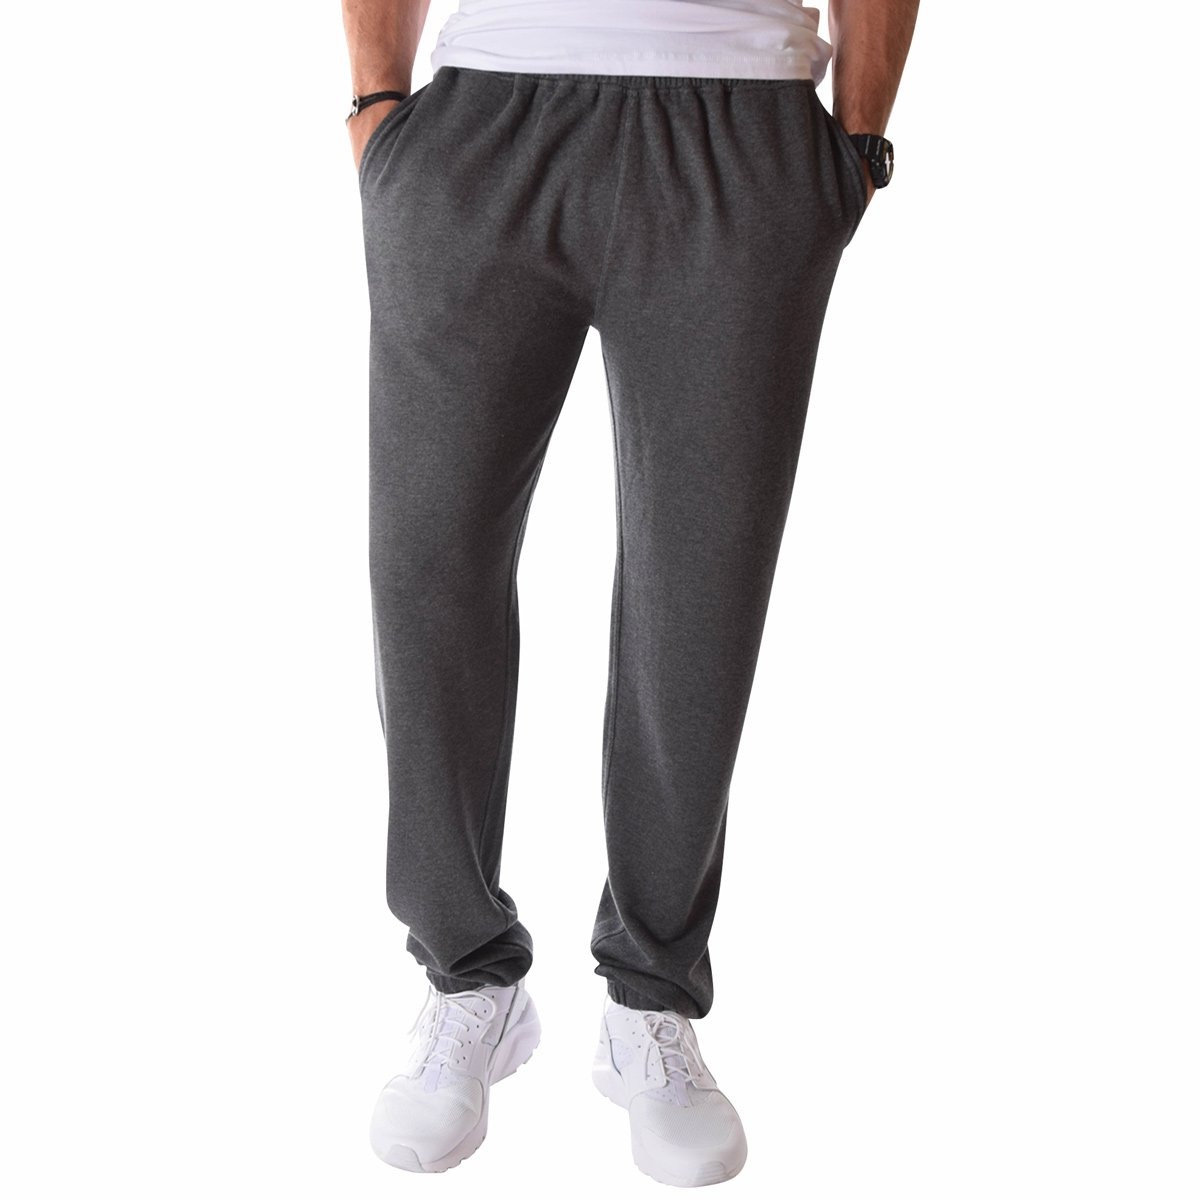 Long sweatpants for tall men with extra 